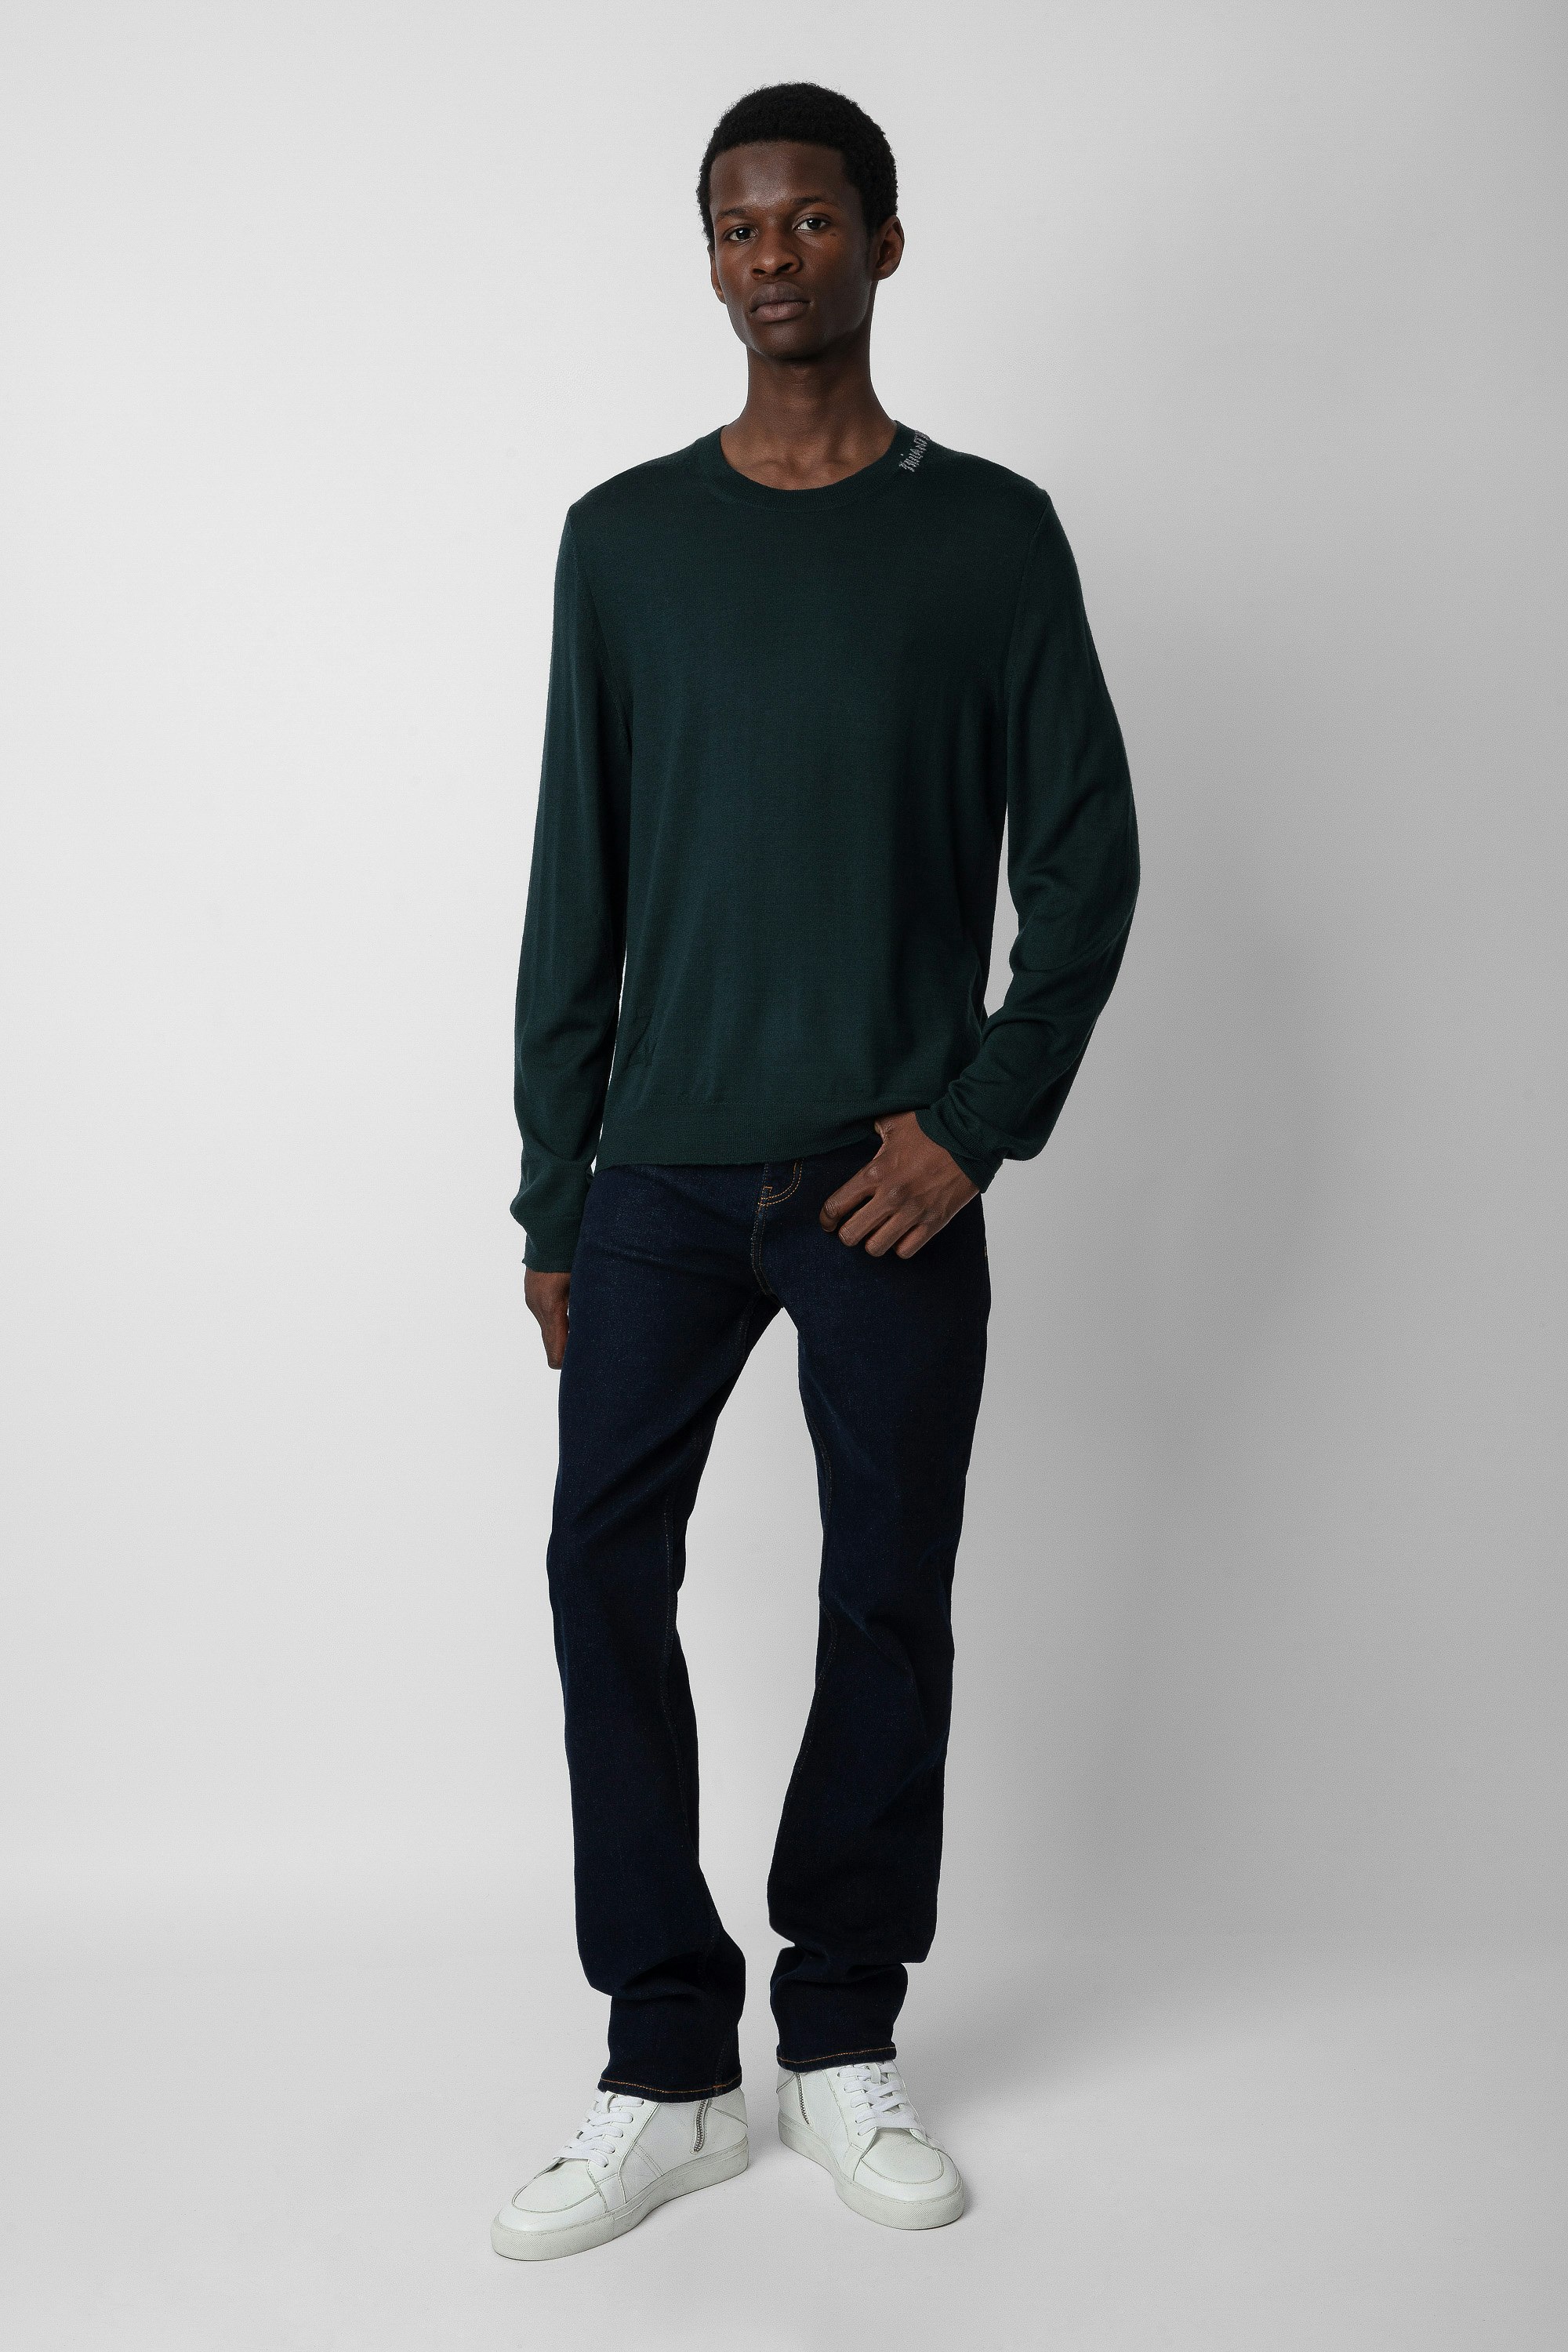 Kennedy Sweater - Men’s green merino wool sweater with “Philanthrope” embroidery on the neckline.